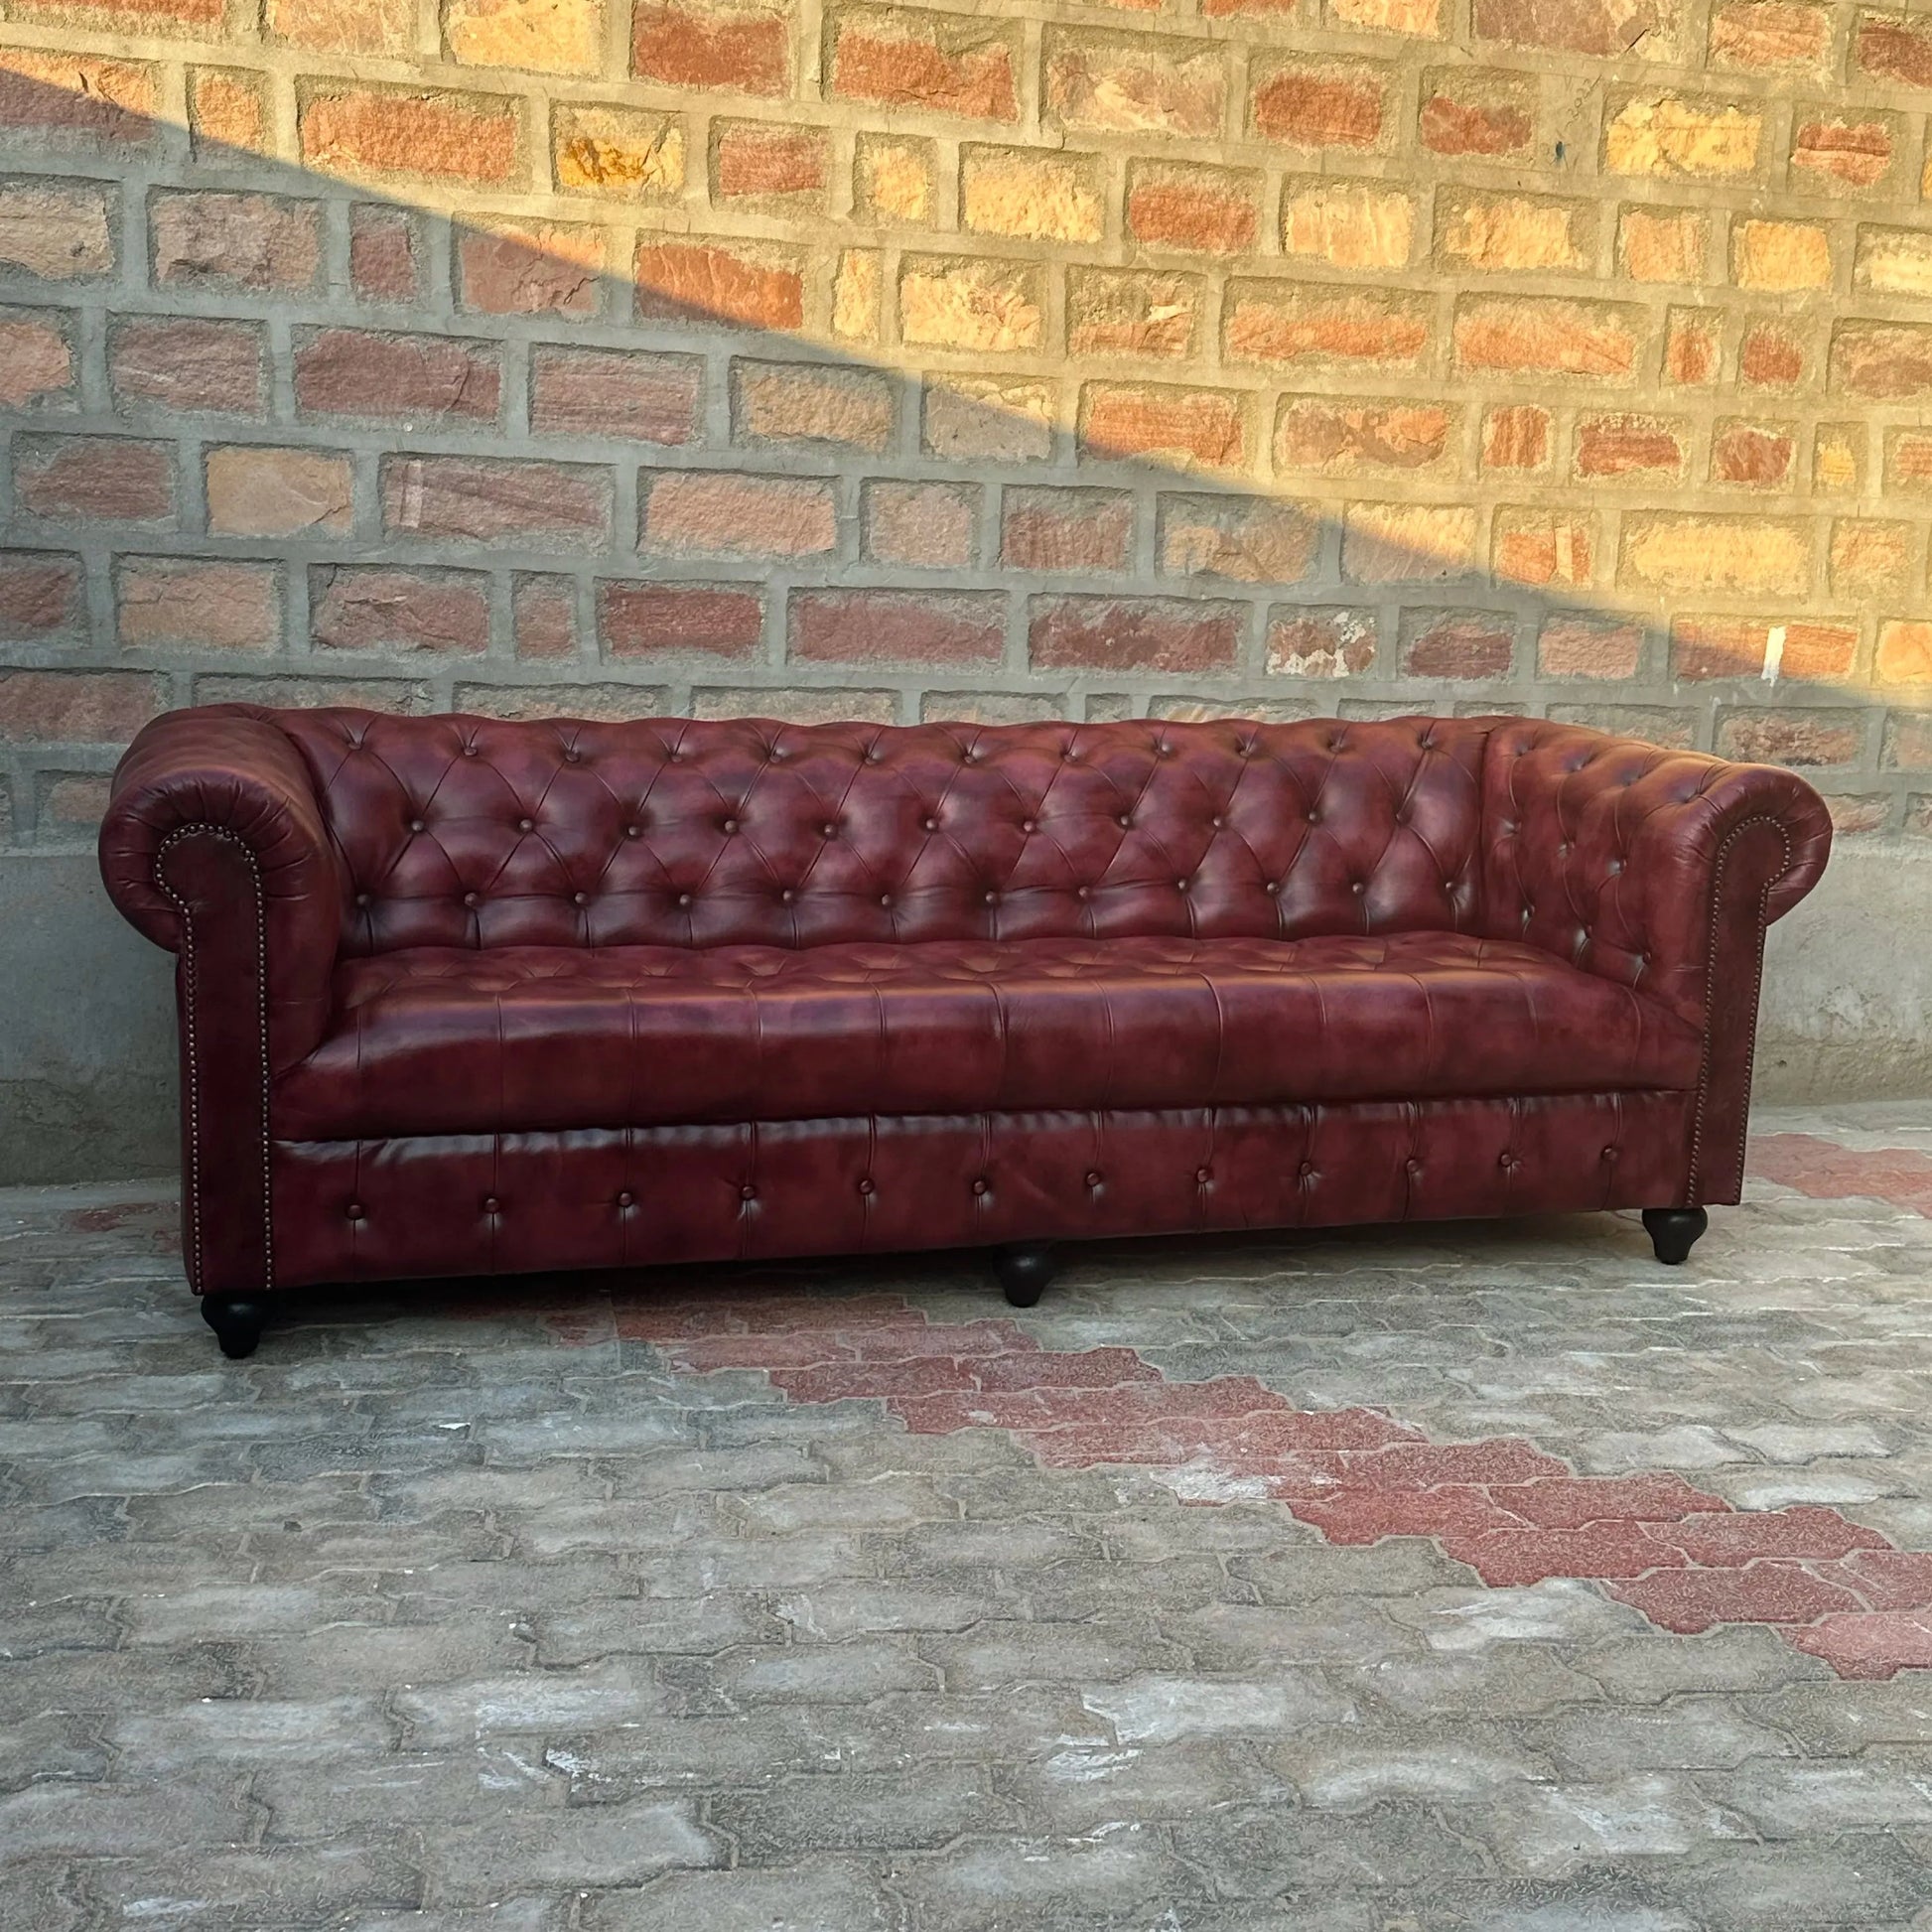 95" Sofa Tufted Bench | Oxford Red Chesterfield Leather Sofa with Tufted Bench Seat (OR-4T) by Rising Tide Design Co.